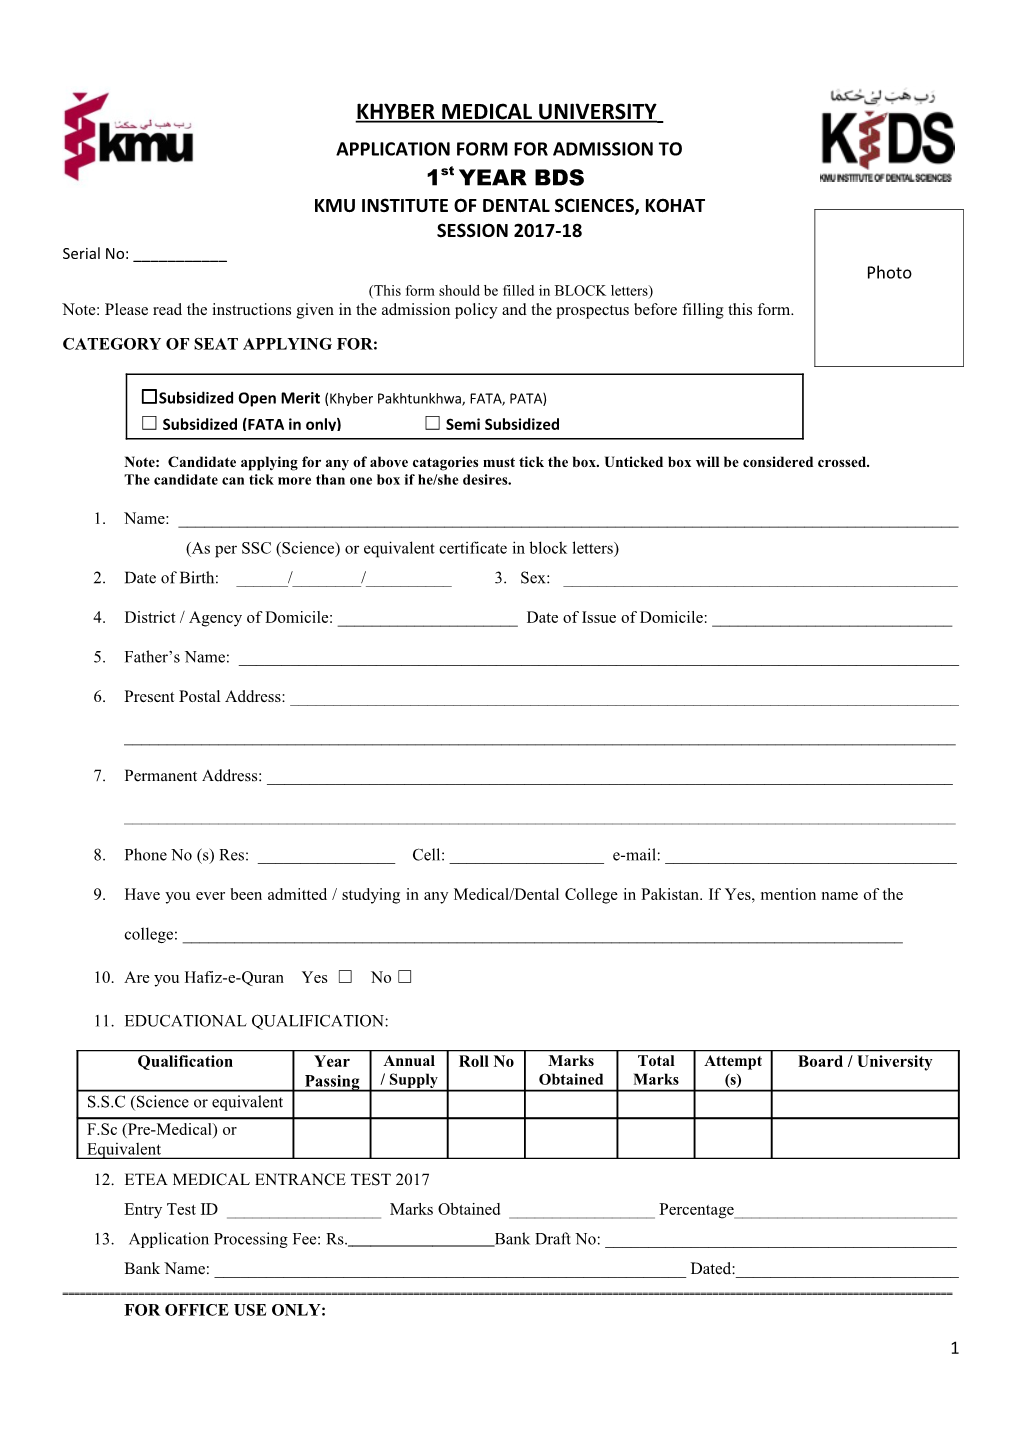 This Form Should Be Filled in BLOCK Letters